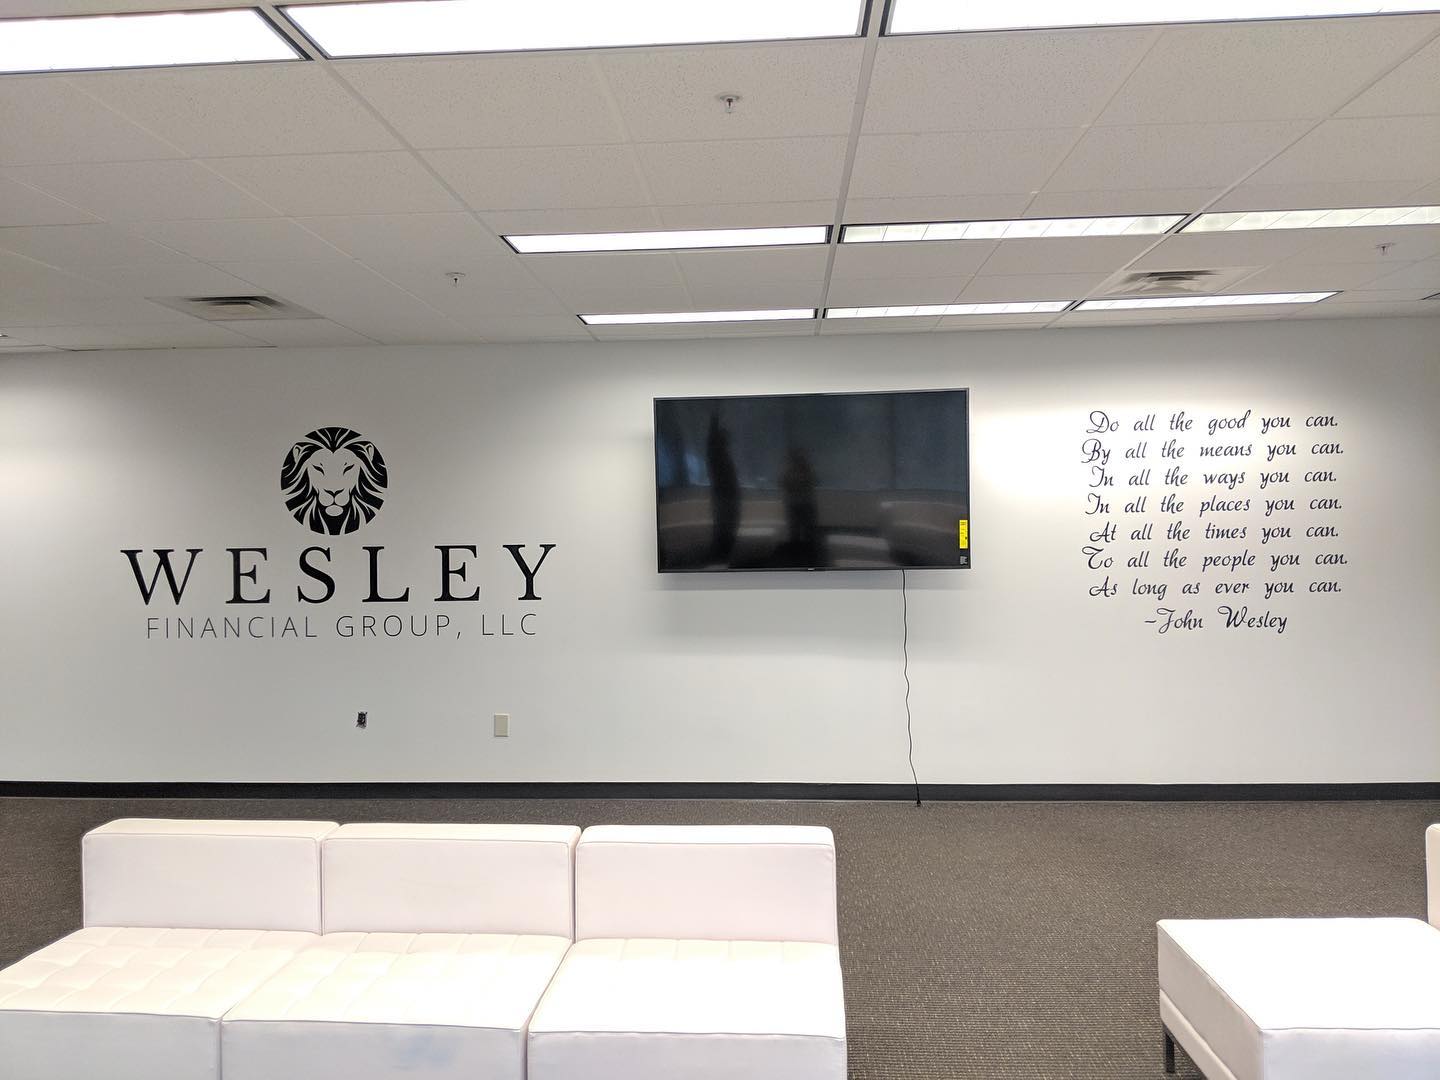 Wesley financial group wall